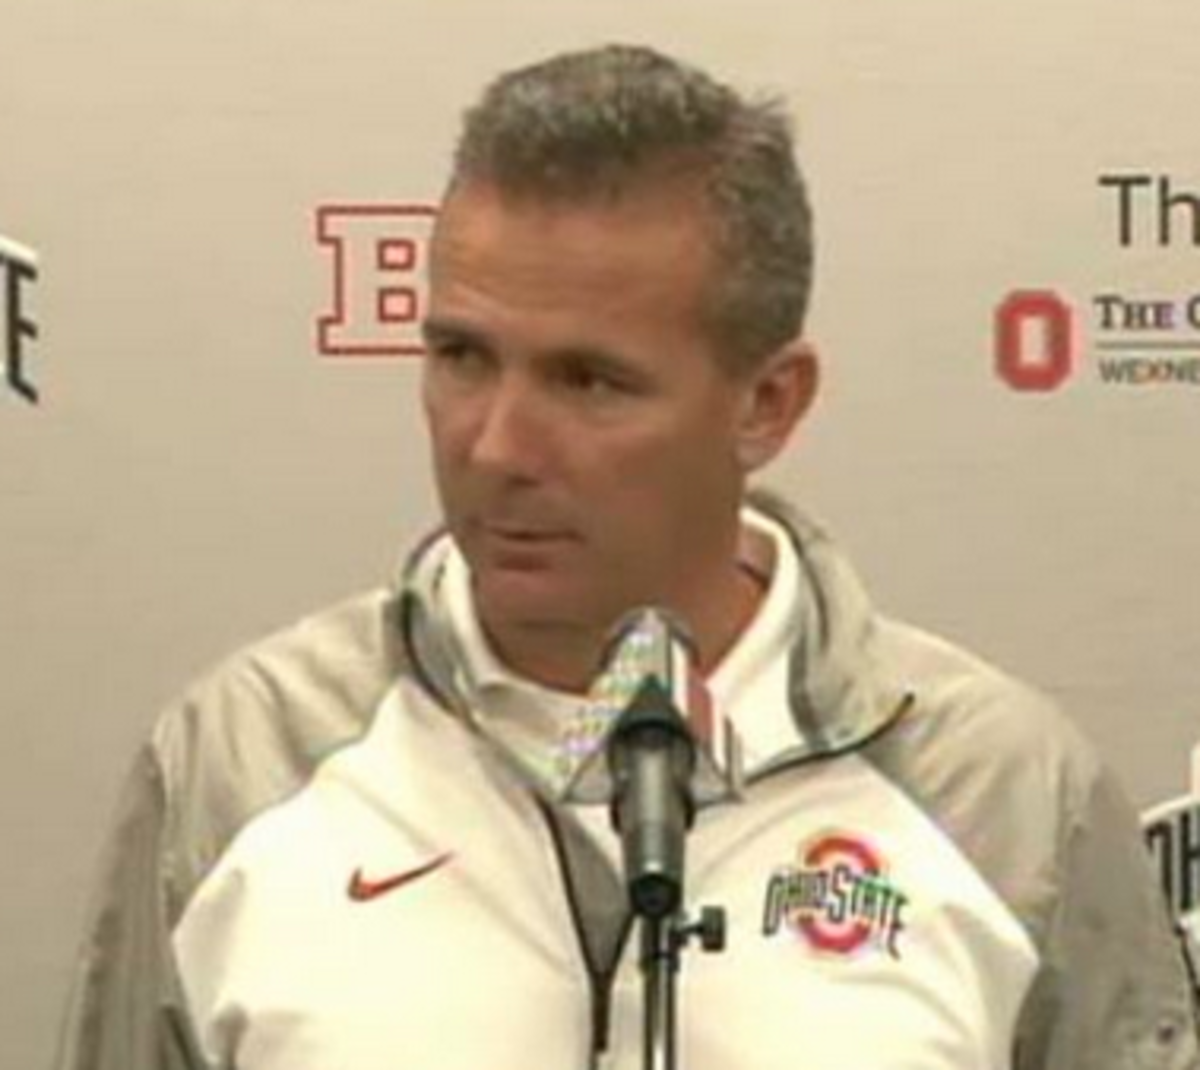 Urban Meyer talks about the quarterback situation at a press conference.